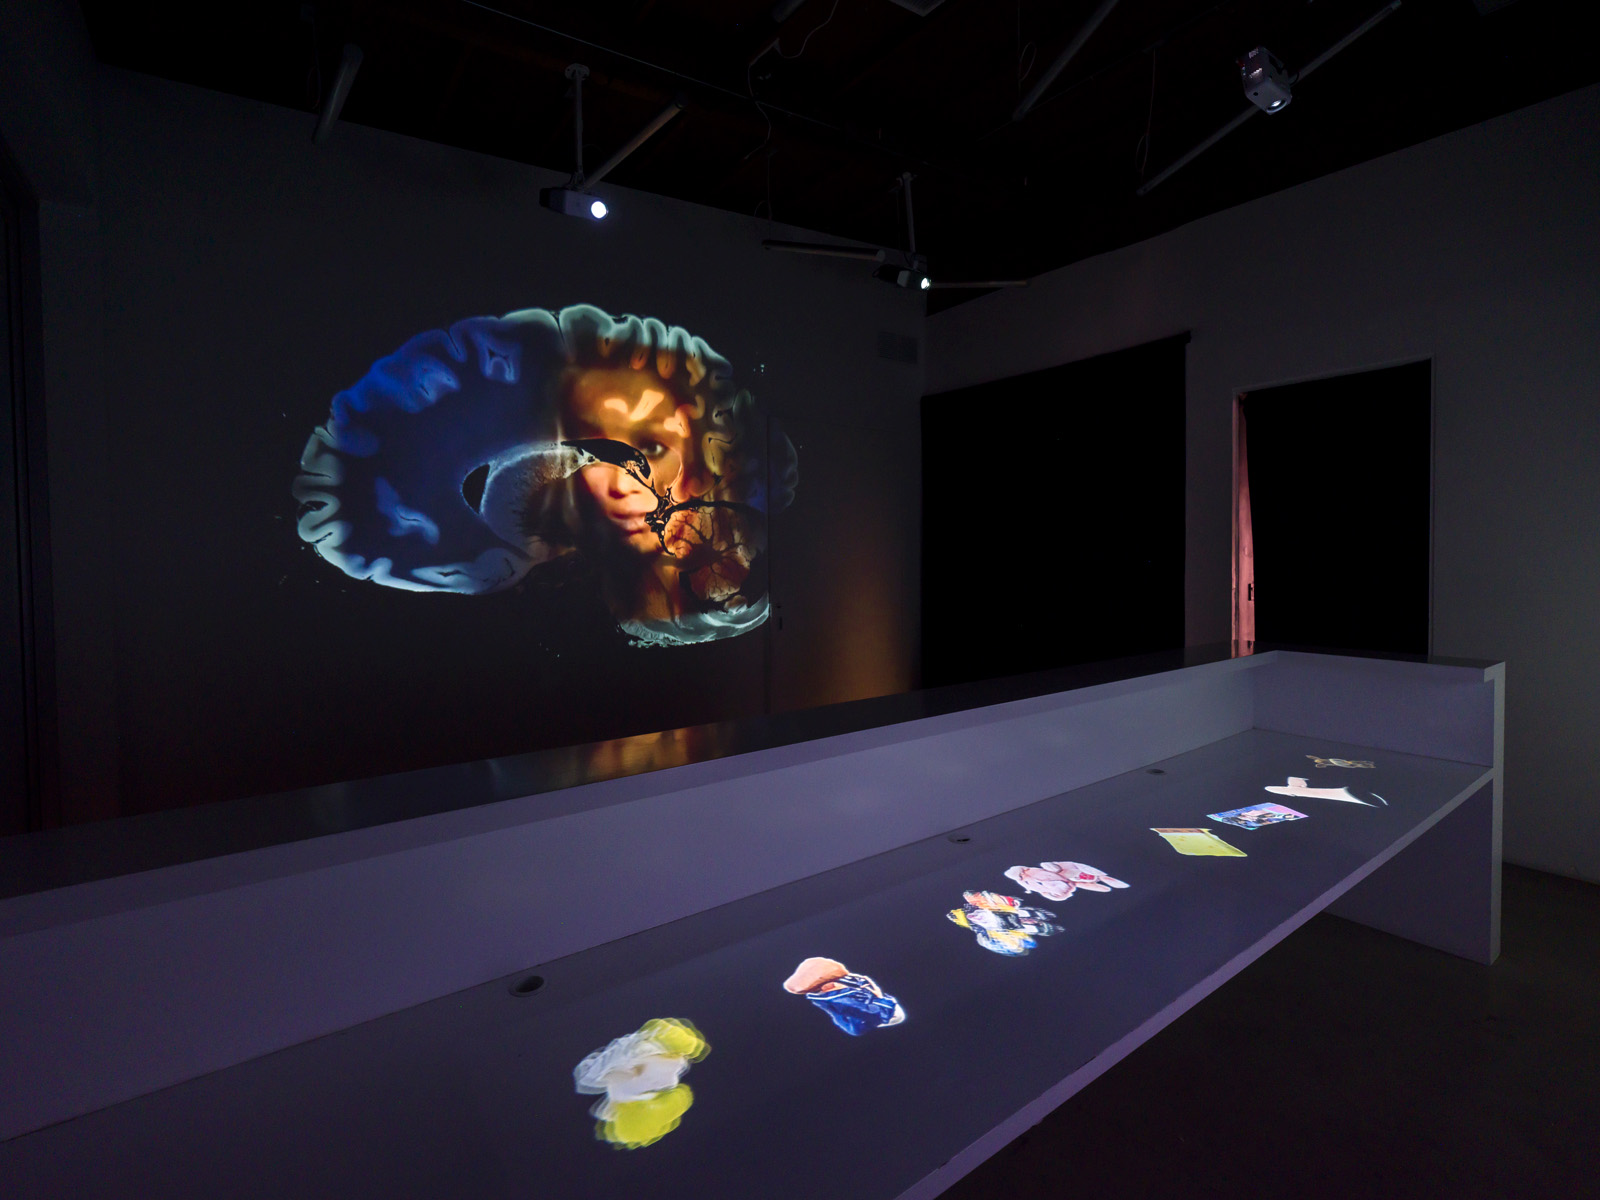 The profile of a brain is projected onto the wall with a video inside of it, displaying a woman looking outwards is projected on to the wall in a dimly lit room, in the foreground is a long desk with various items projected onto it from the ceiling downwards.